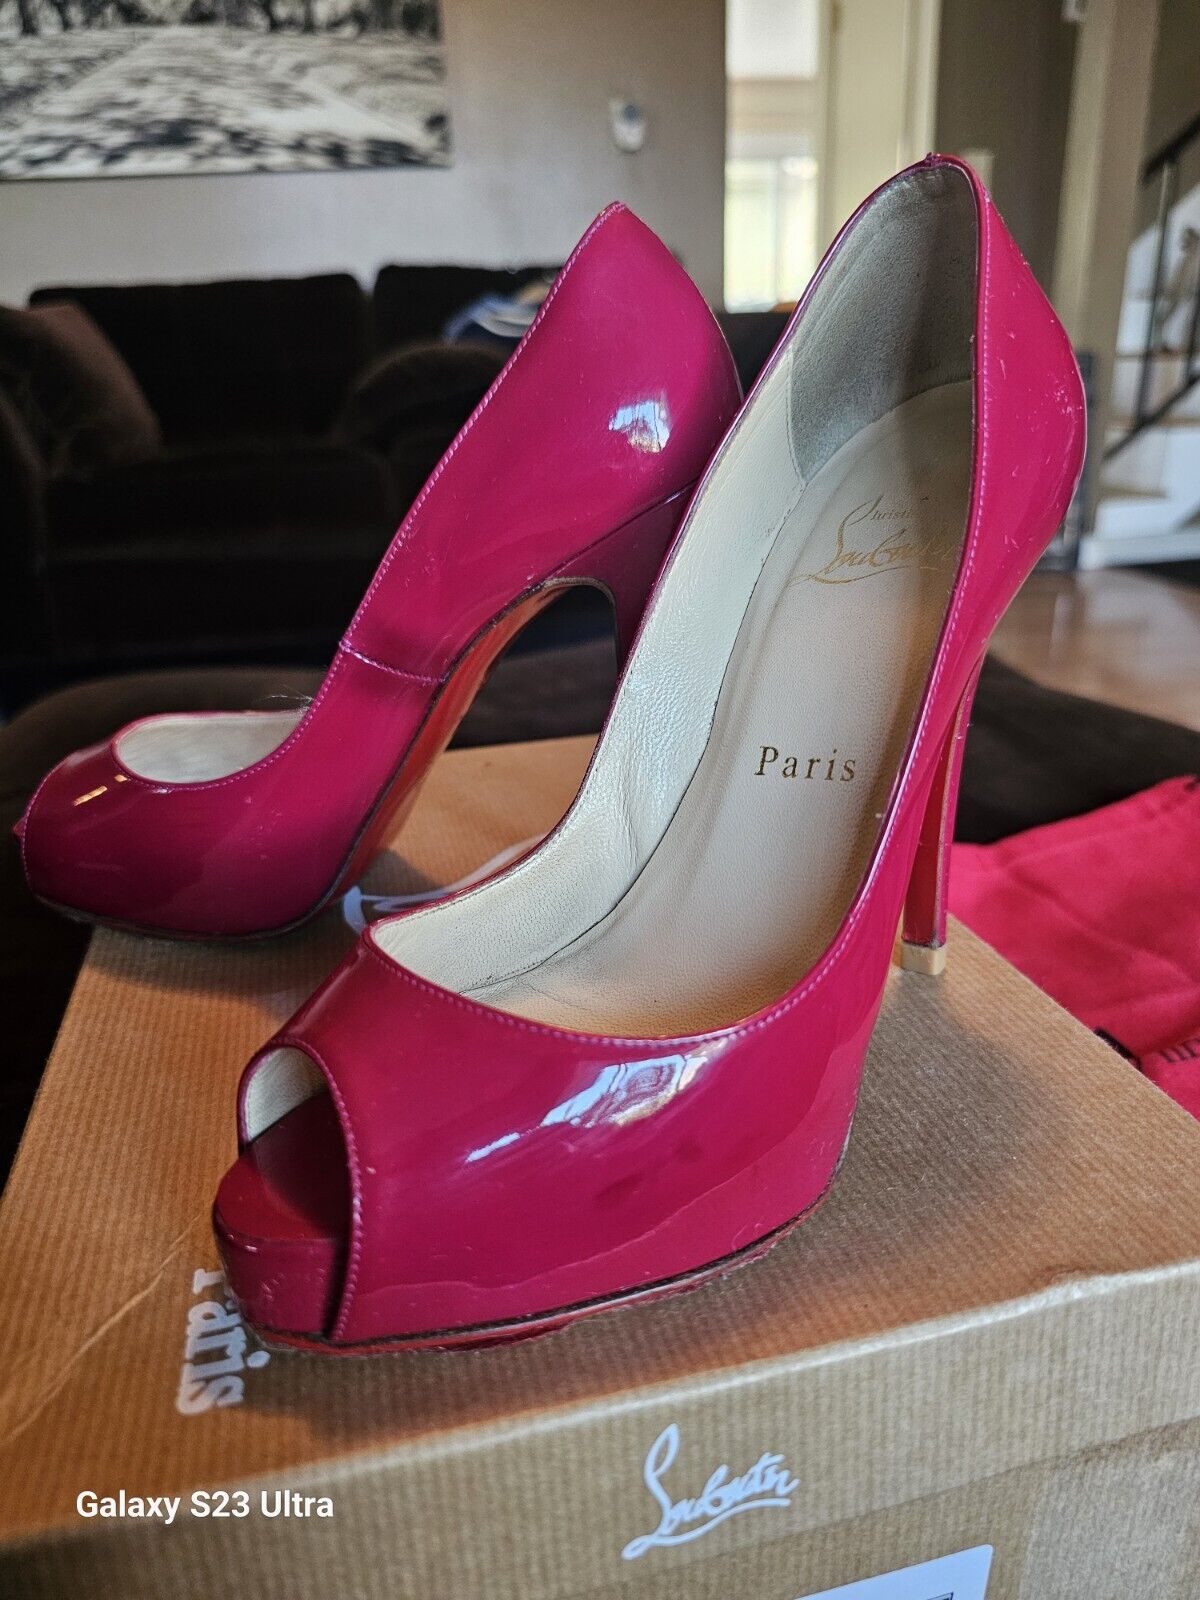 Christian Louboutin Very Prive 120 Size: 35.5 EU/ 5.5 US Color: Framboise (Pink)